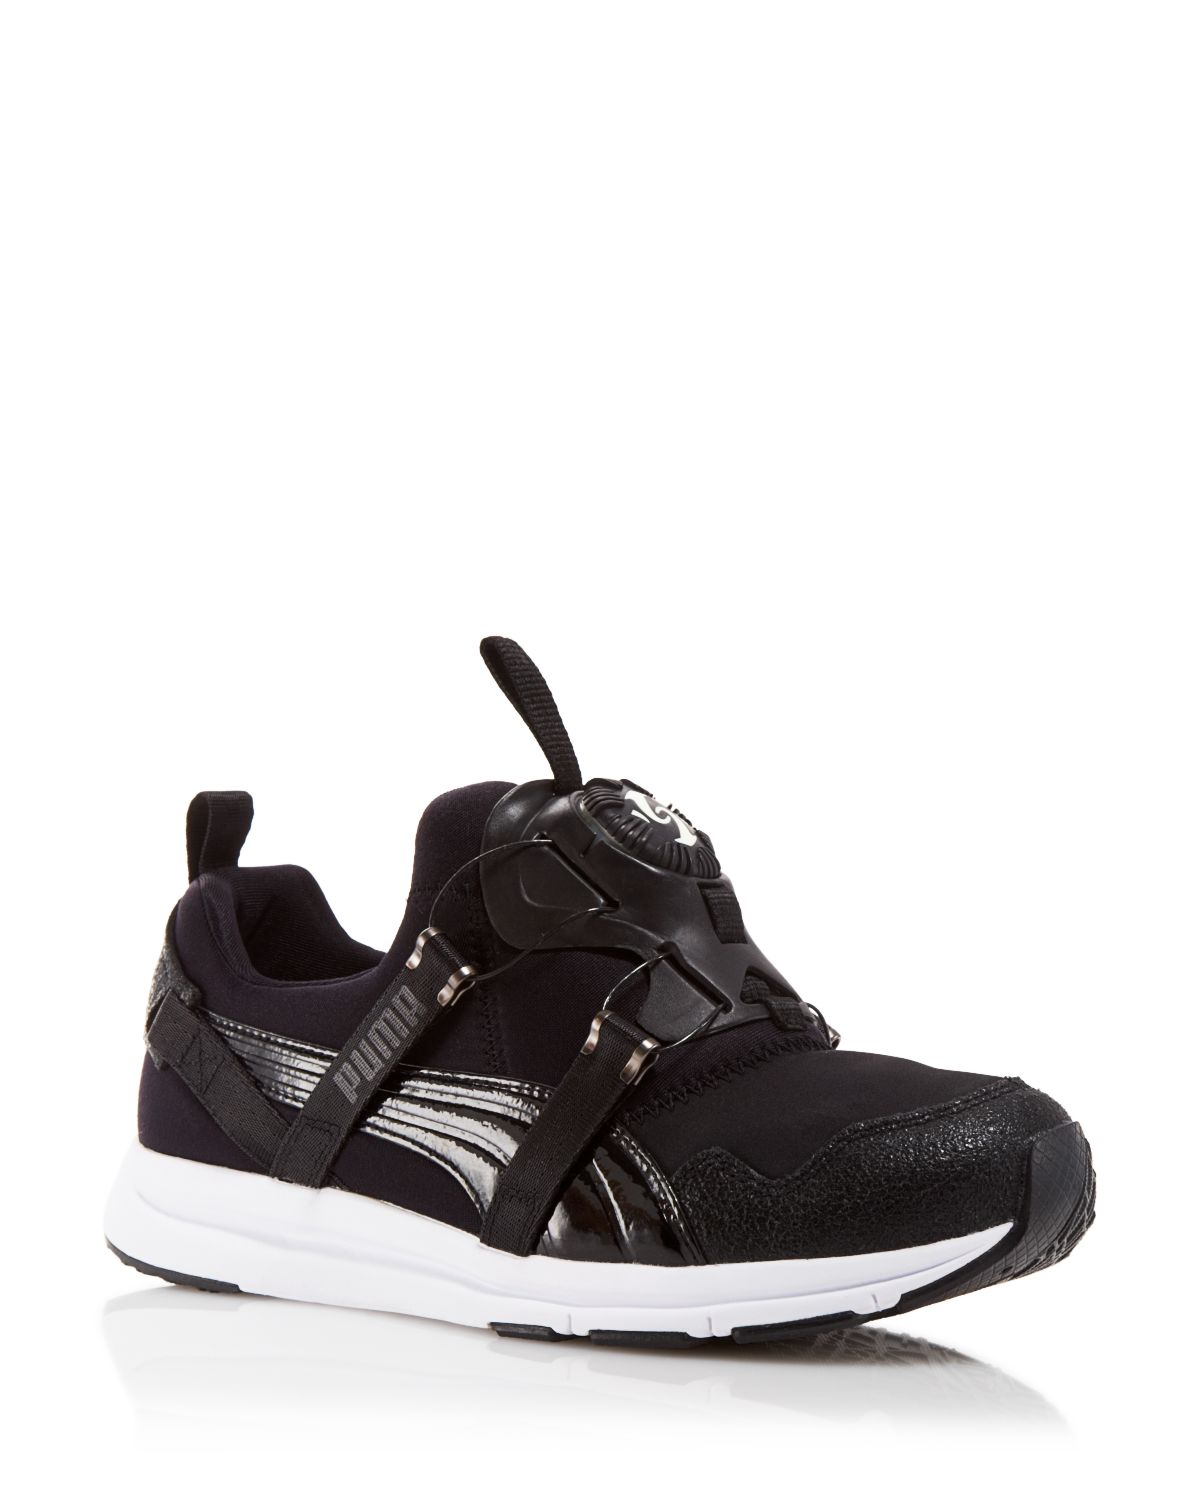 Lyst Puma Sneakers Women'S Disc Black And White in Black